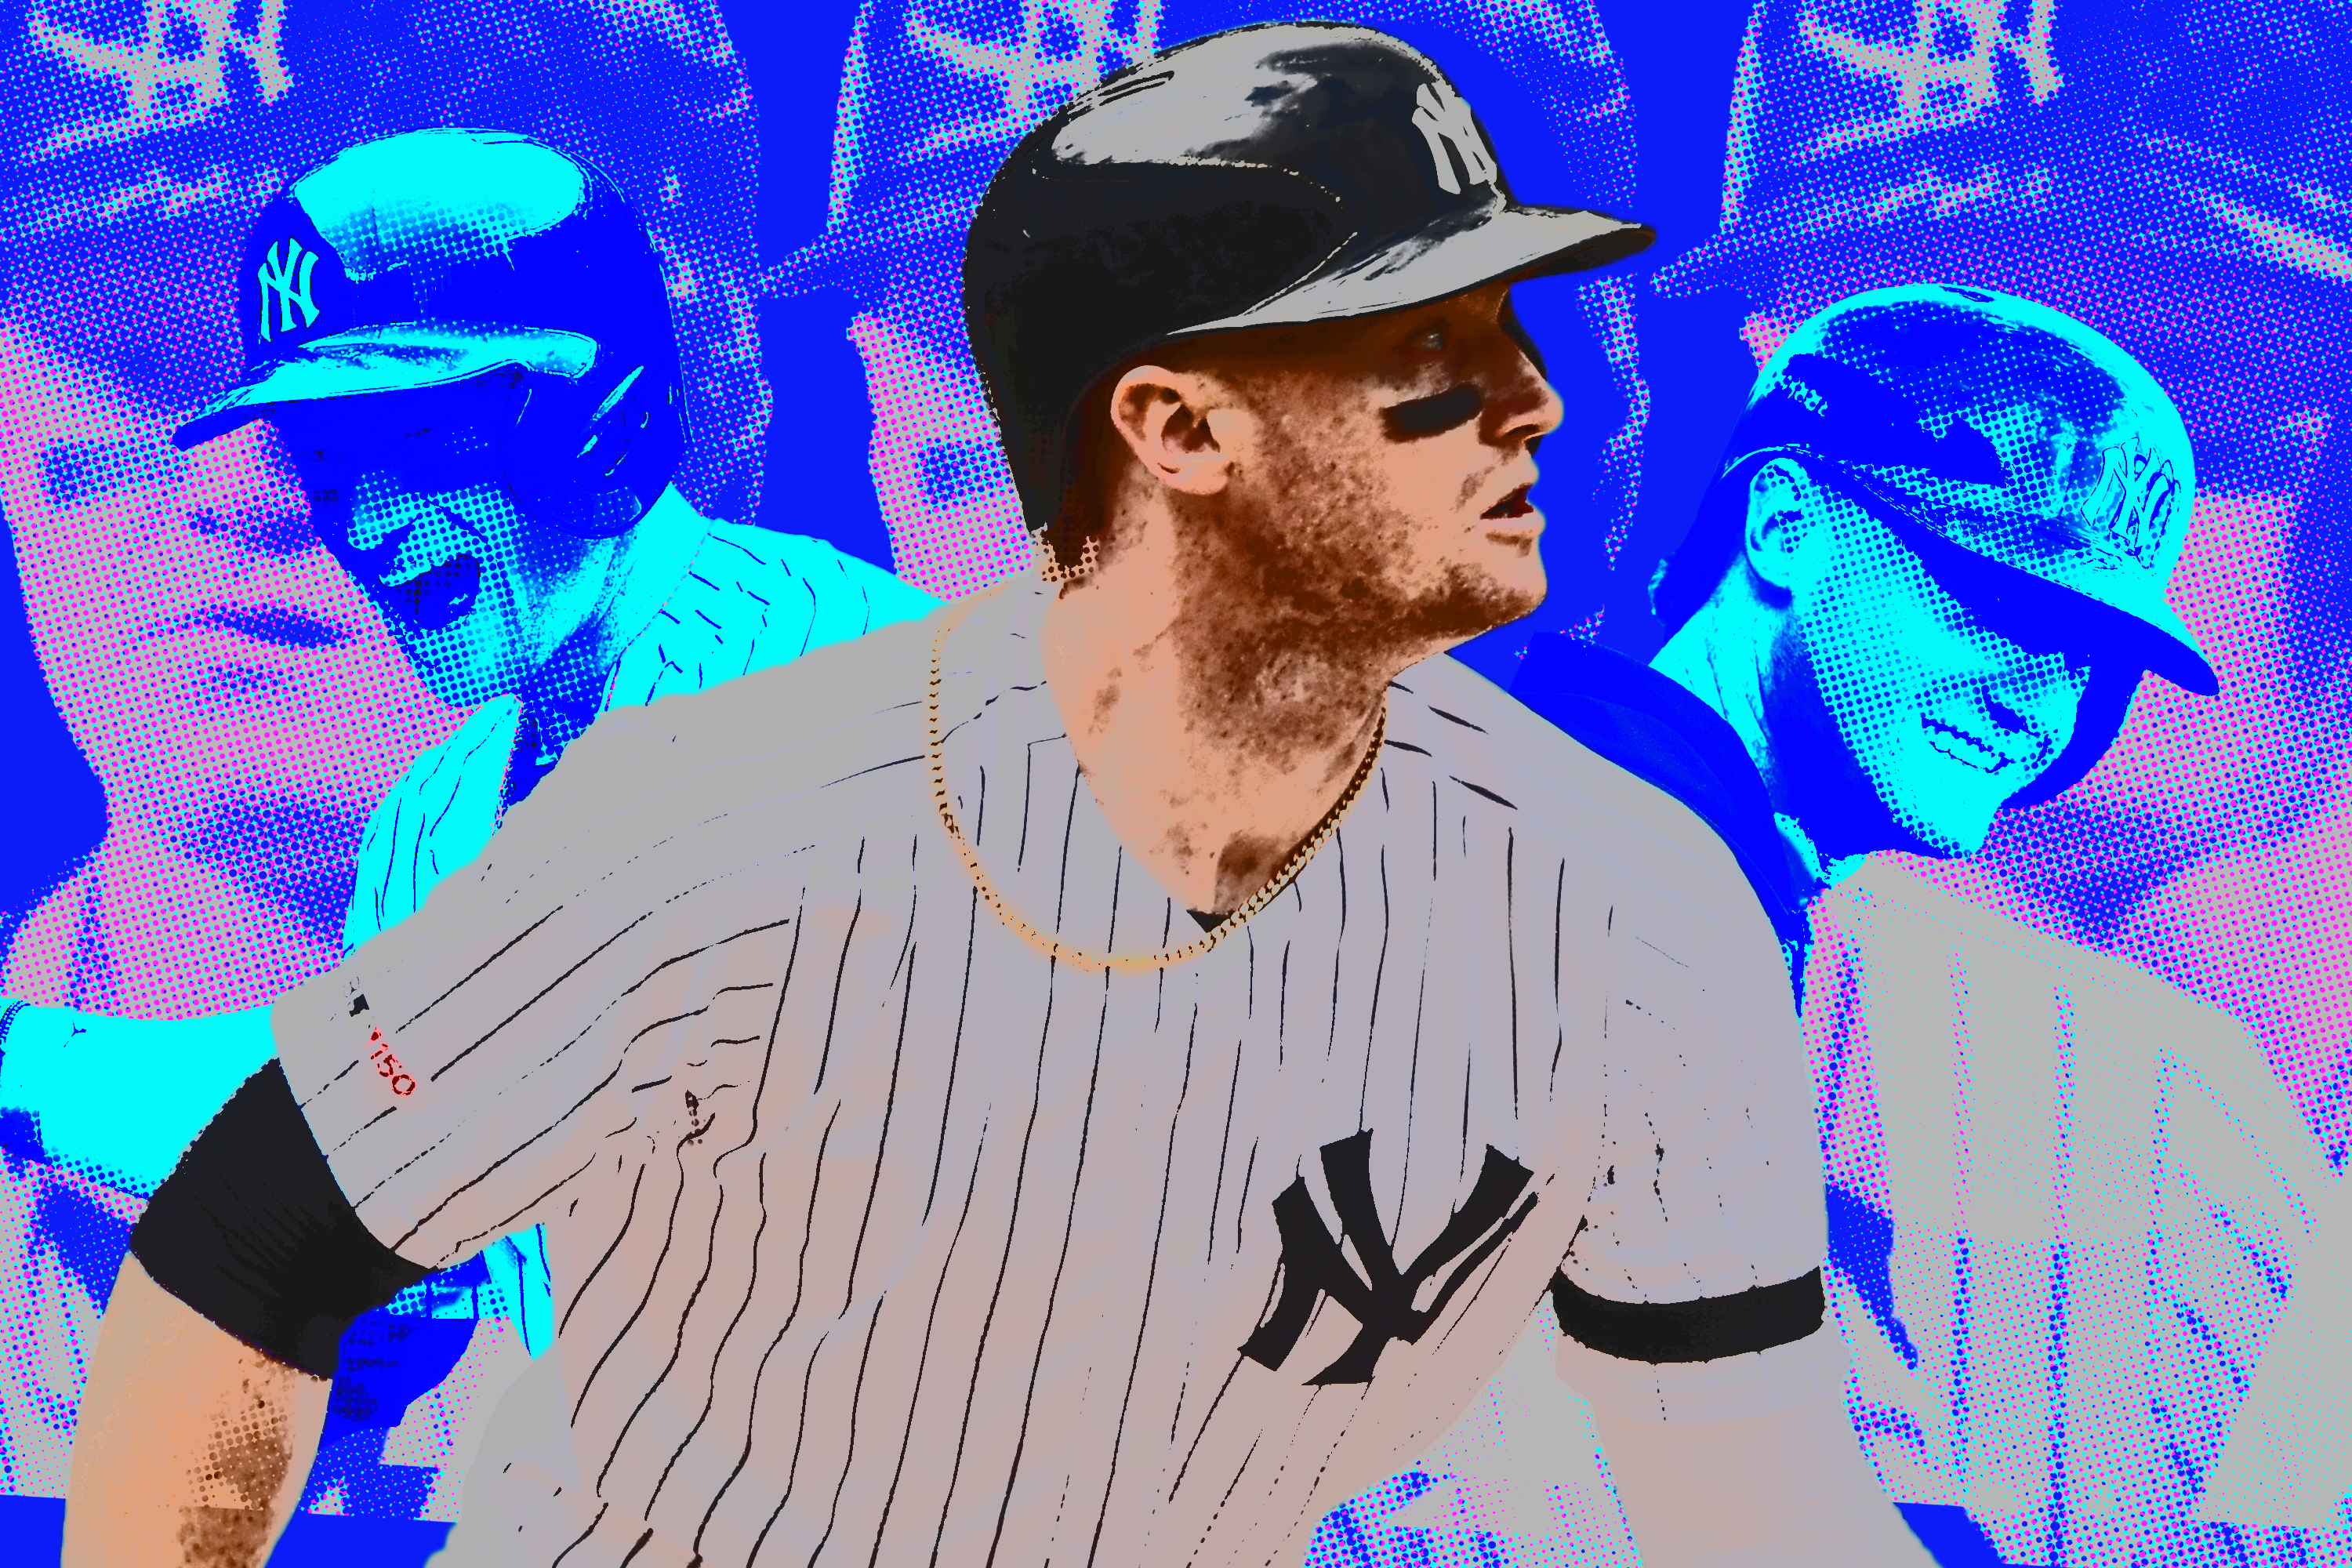 Can Clint Frazier cement his place on the Yankees in 2020? - Pinstripe Alley